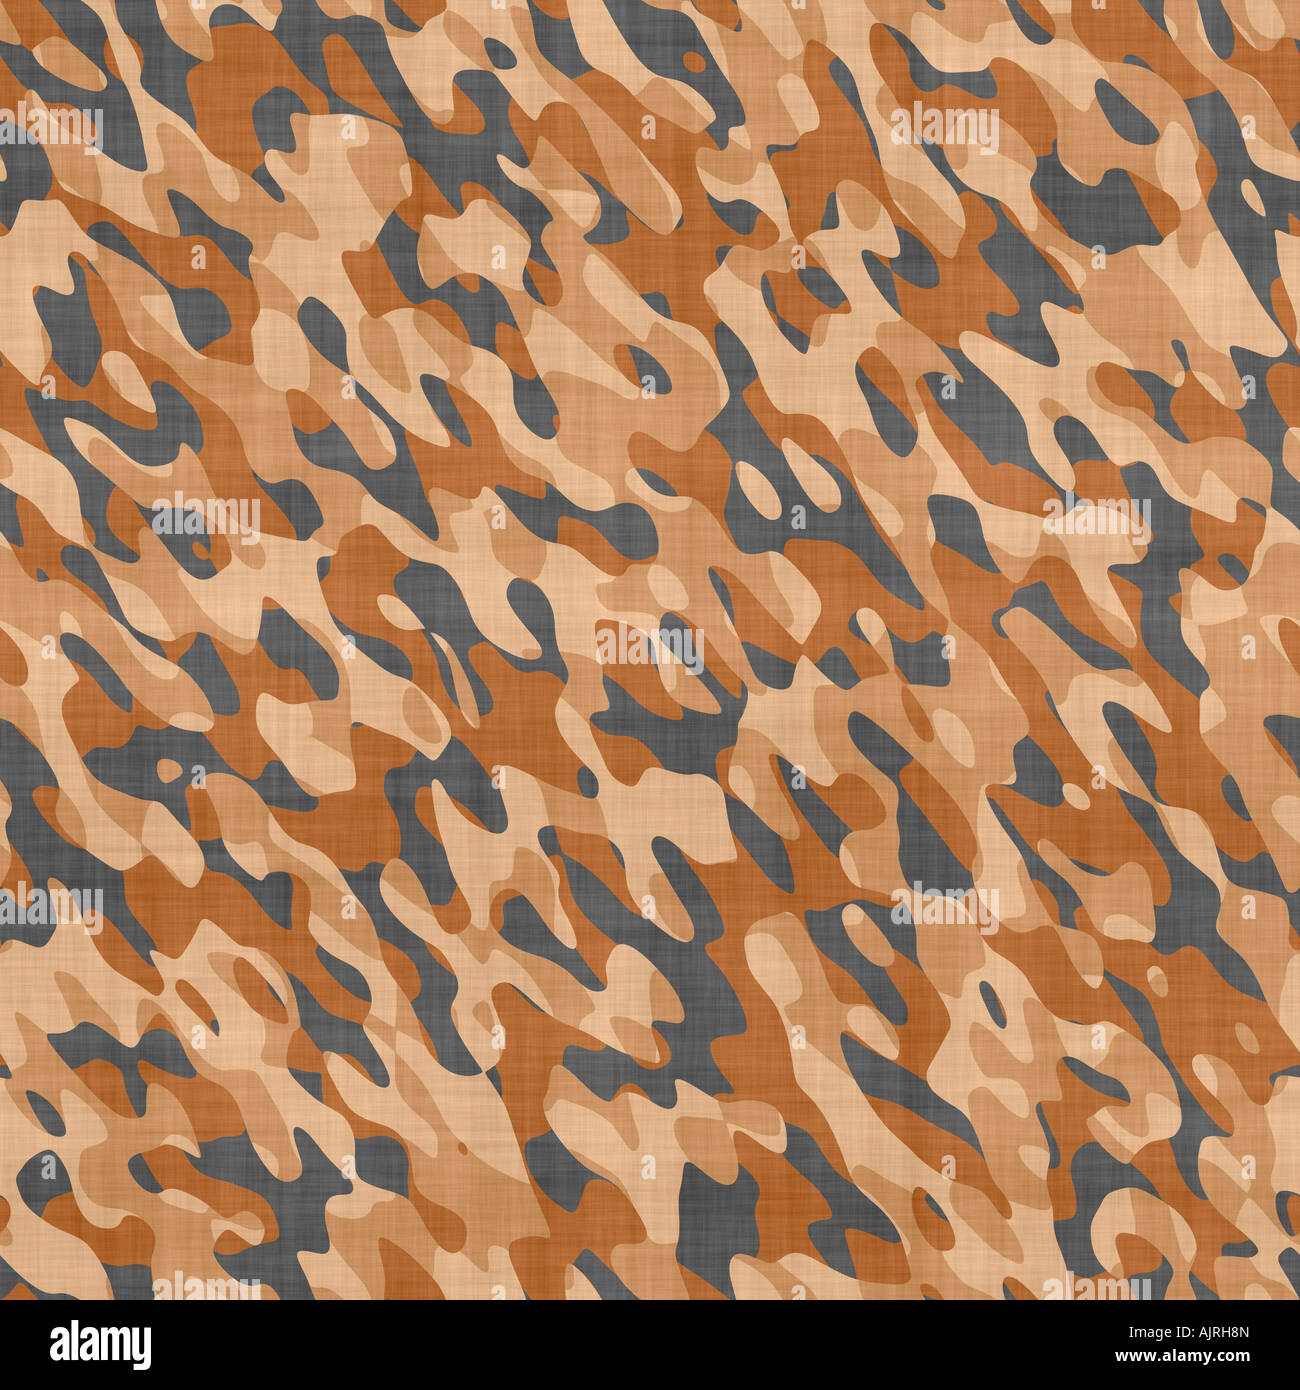 large seamless image of cloth printed with military camouflage pattern Stock Photo